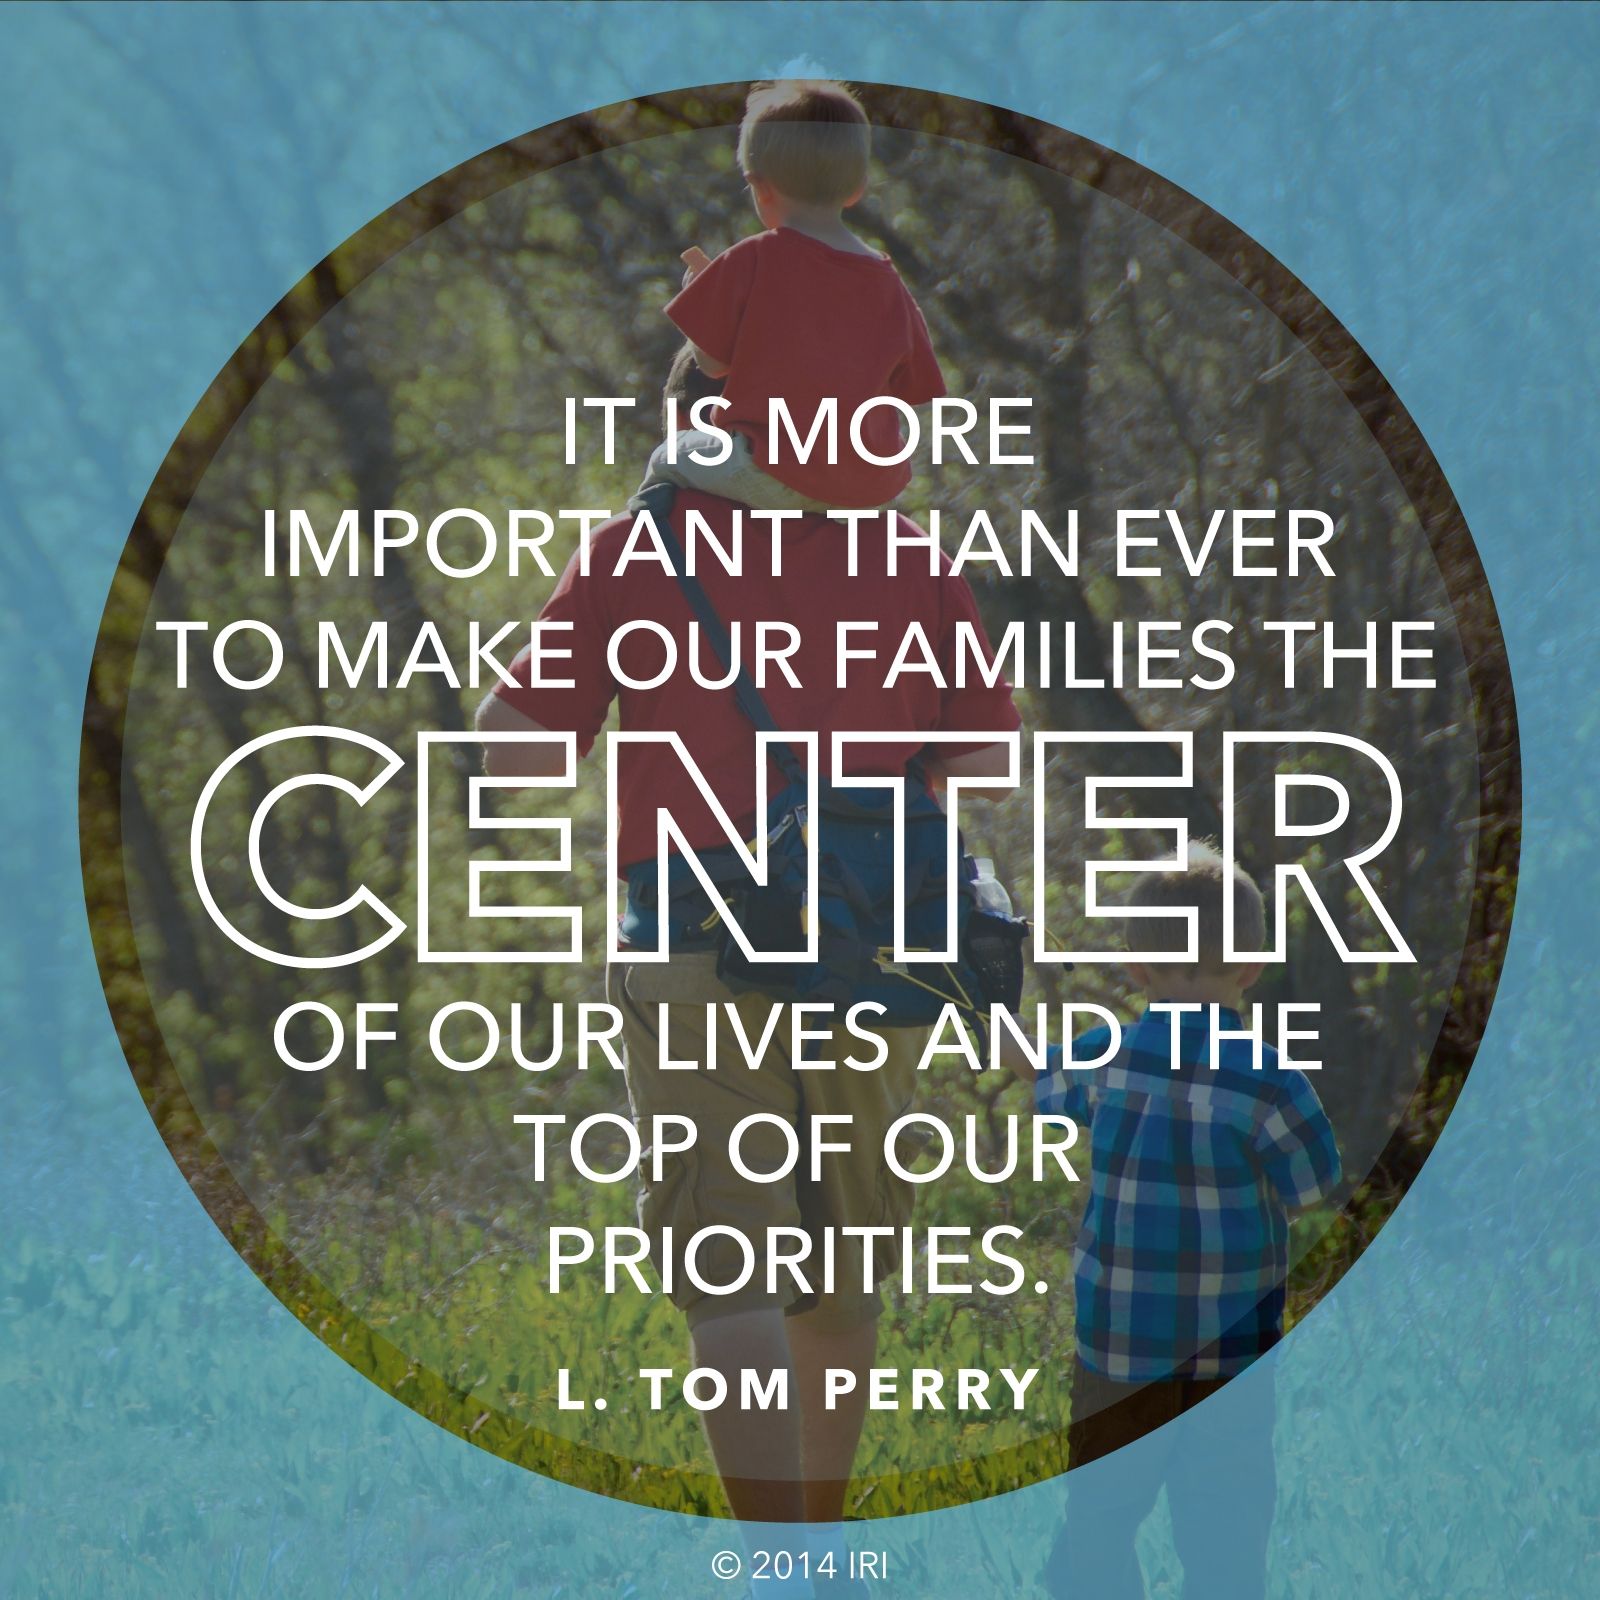 “It is more important than ever to make our families the center of our lives and the top of our priorities.”—Elder L. Tom Perry, “The Importance of the Family” © undefined ipCode 1.